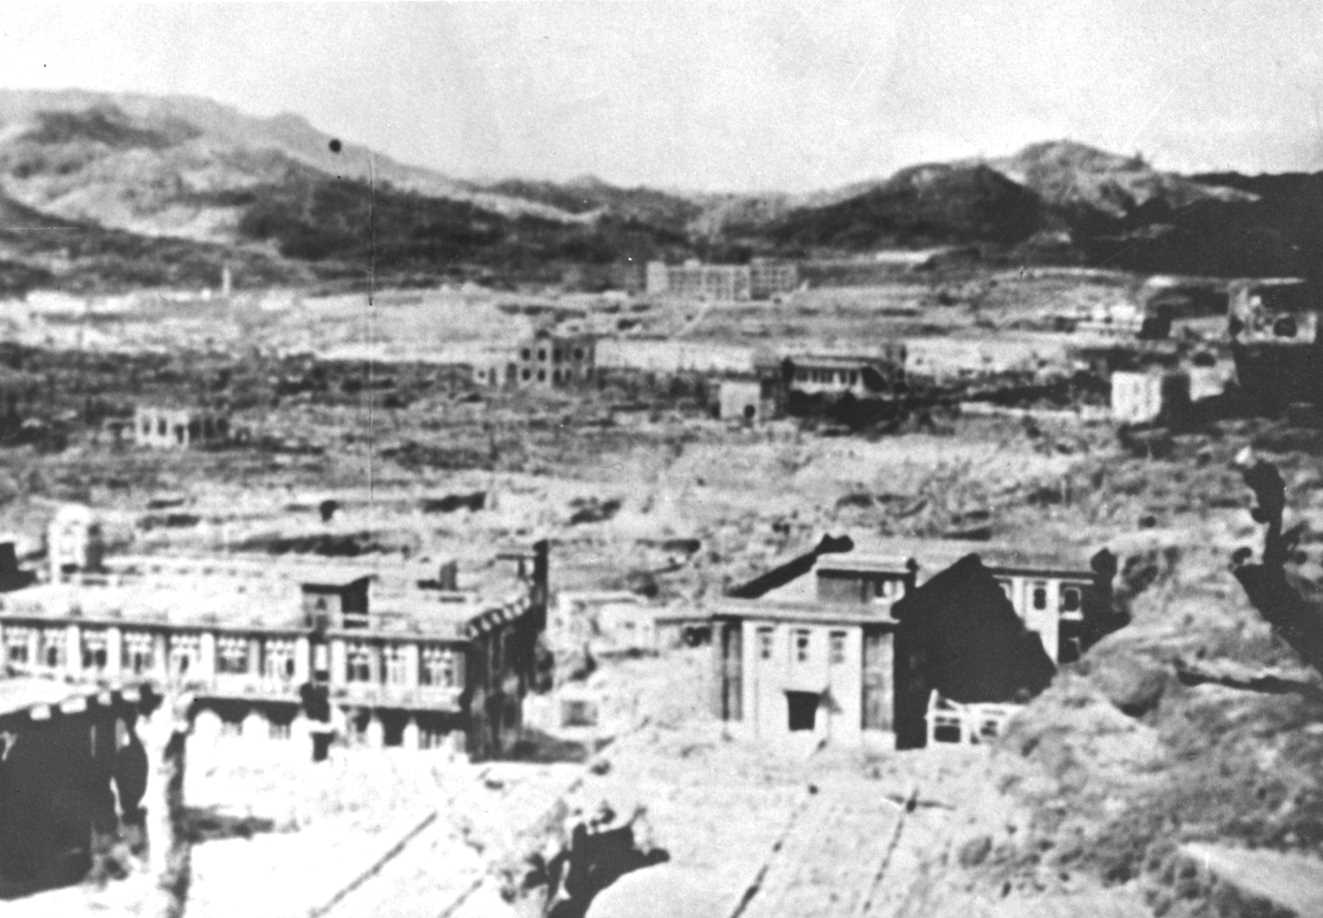 Nagasaki in ruins after the atomic bomb attack, pictured on Aug. 9, 1945. (Kyodo)